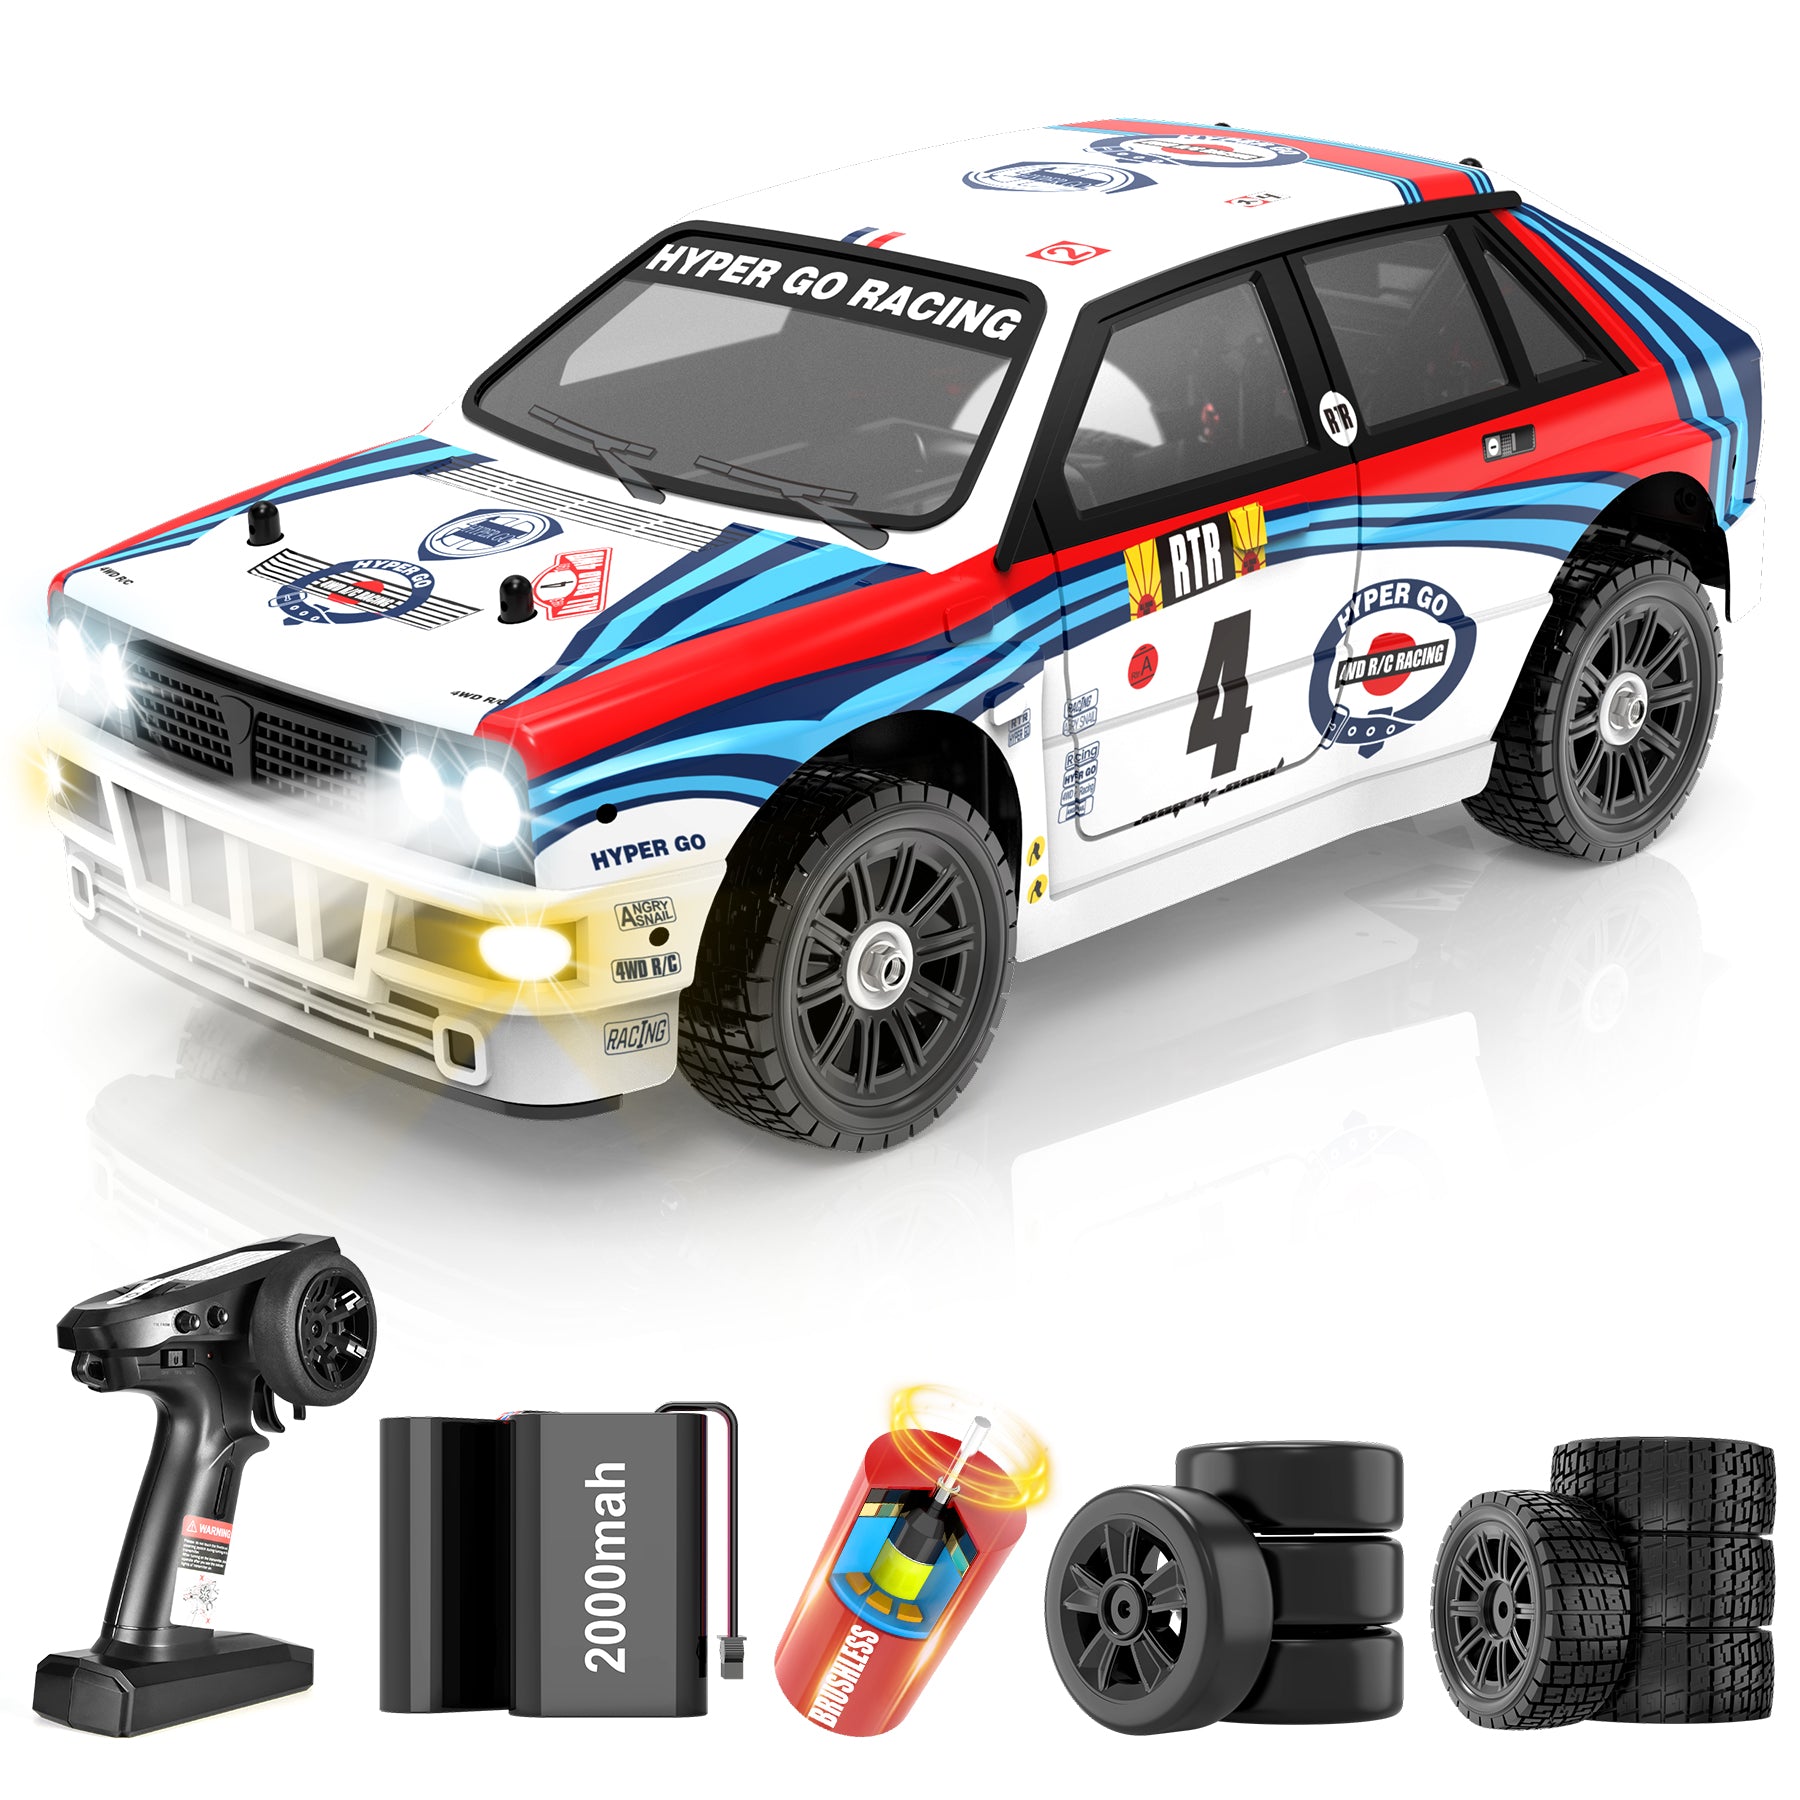 Hosim Brushless RC Car 1:14 60+KMH 4WD Fast Remote Control Truck for Adults Radio Cars Off-Road Waterproof Hobby Grade Toy Crawler Electric Vehicle Gift